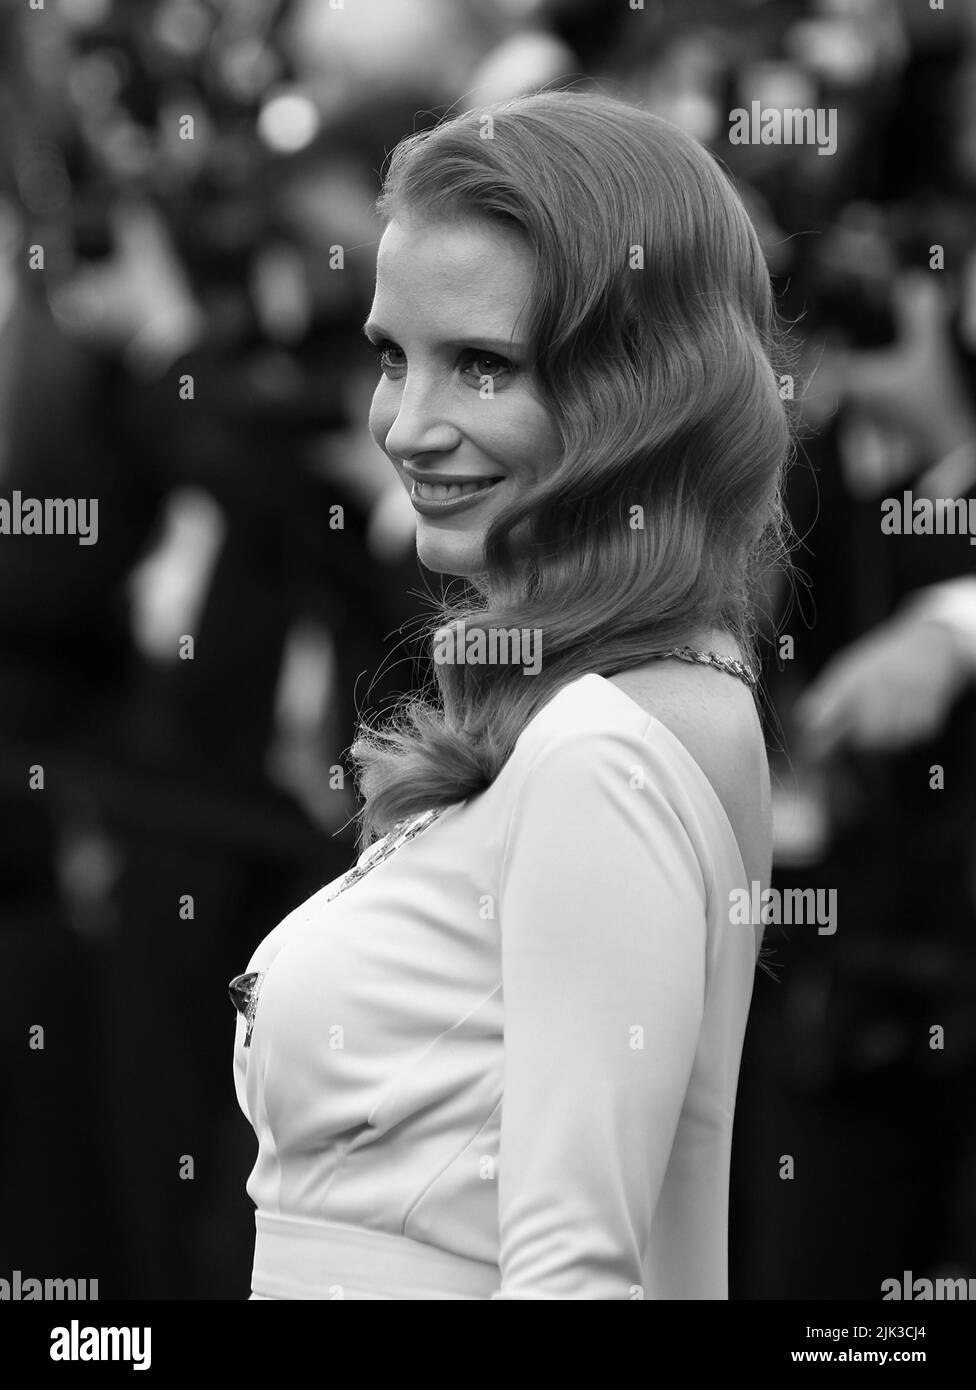 Cannes, France, 21th 05,2013: Jessica Chastain attends the Behind the Candelabra Premiere - The 66th Annual Cannes Film Festival at the Palais des Festivals in Cannes, France. Stock Photo